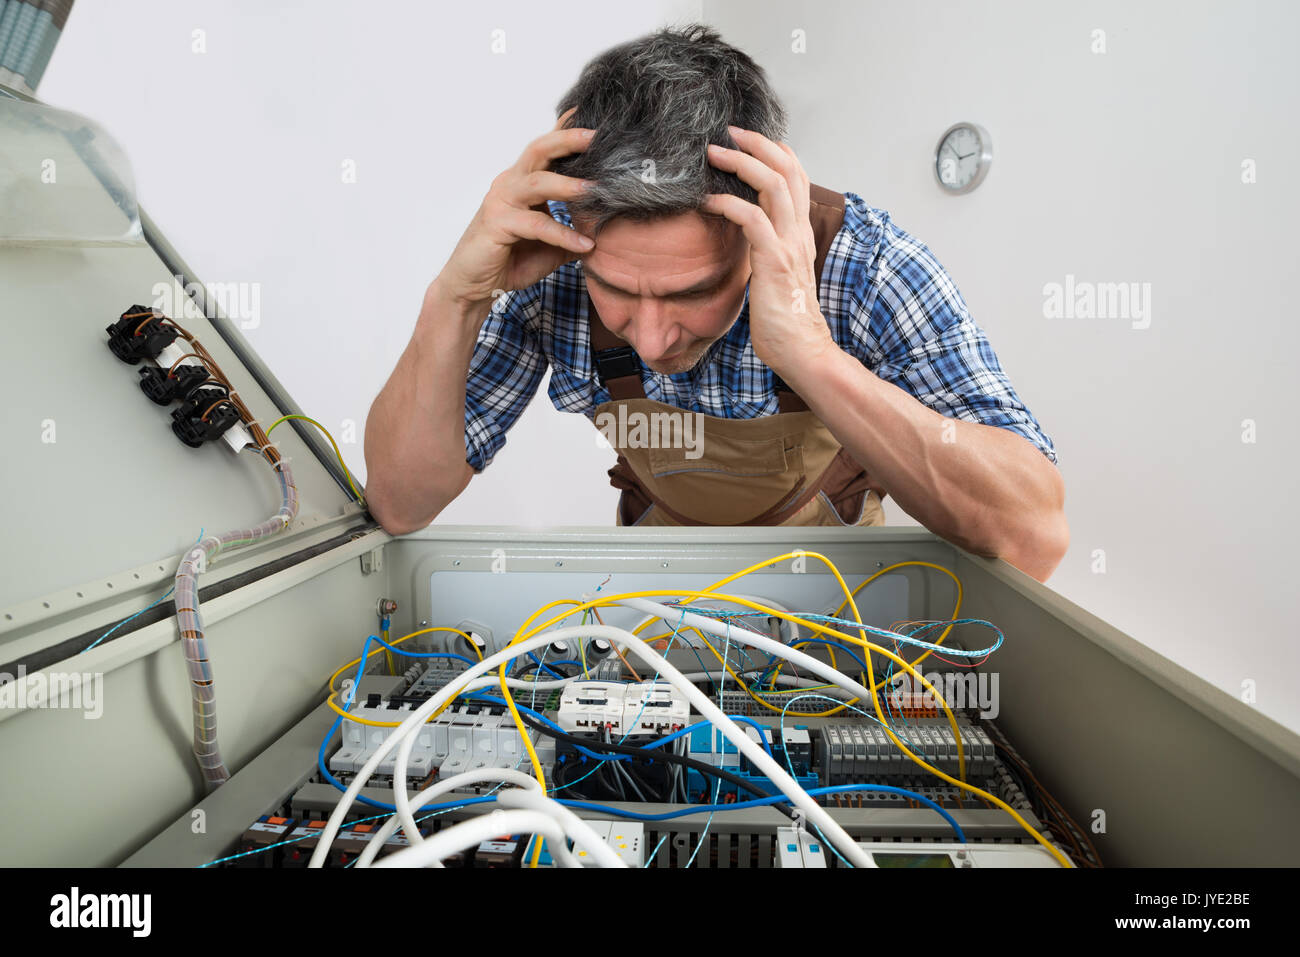 Portrait Of A Confused Electrician Looking At Fuse Box Stock Photo